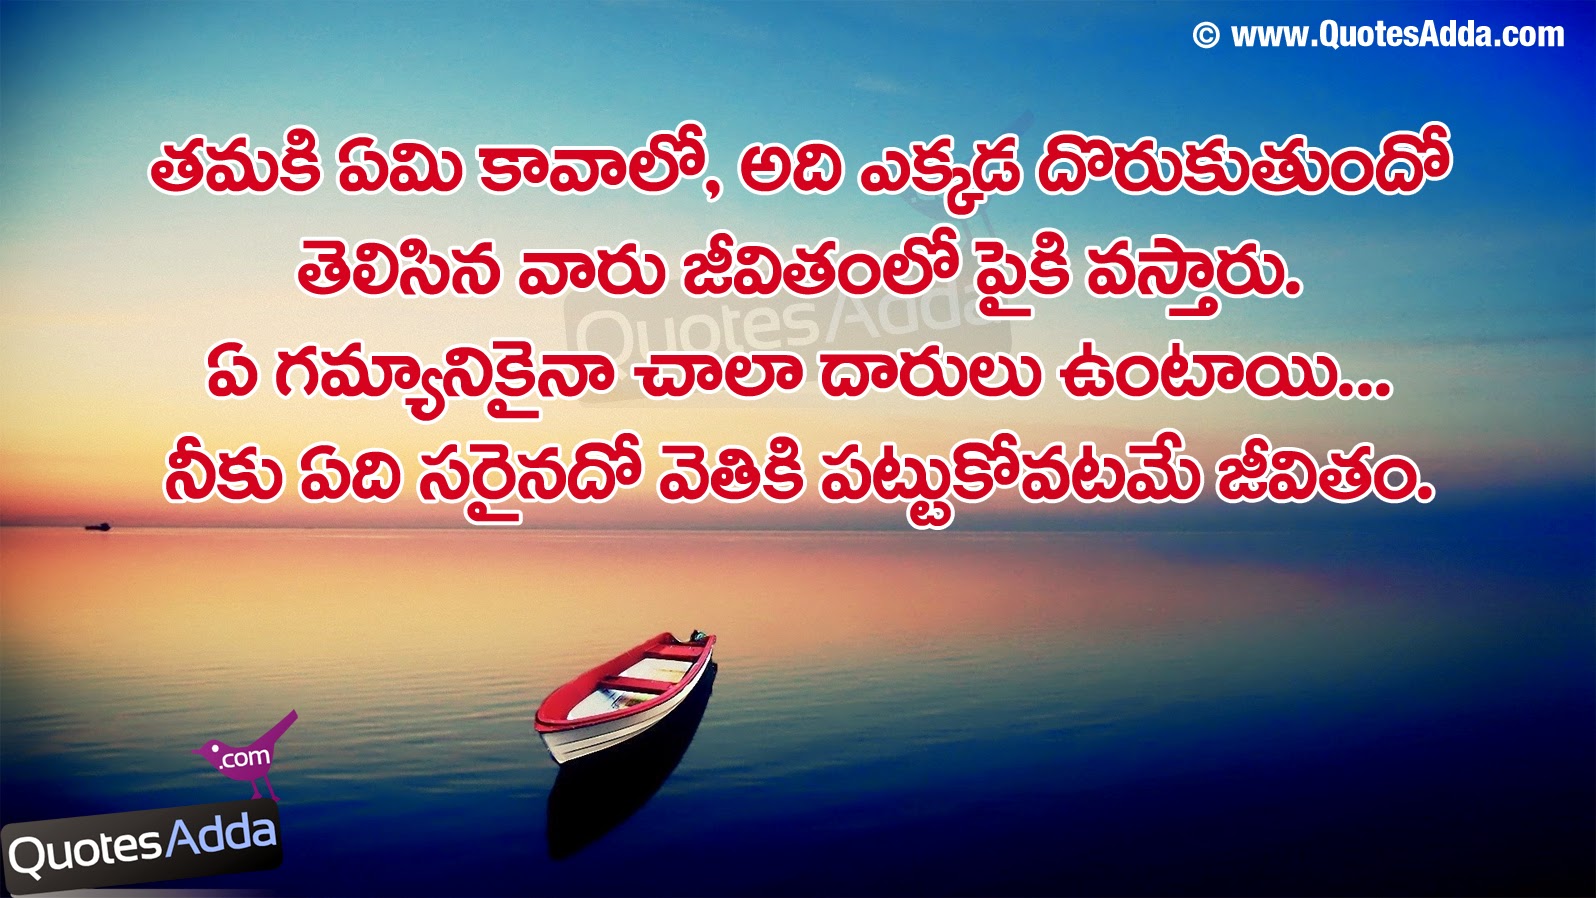 New Sad Life Quotes Telugu meaning wallpapers images